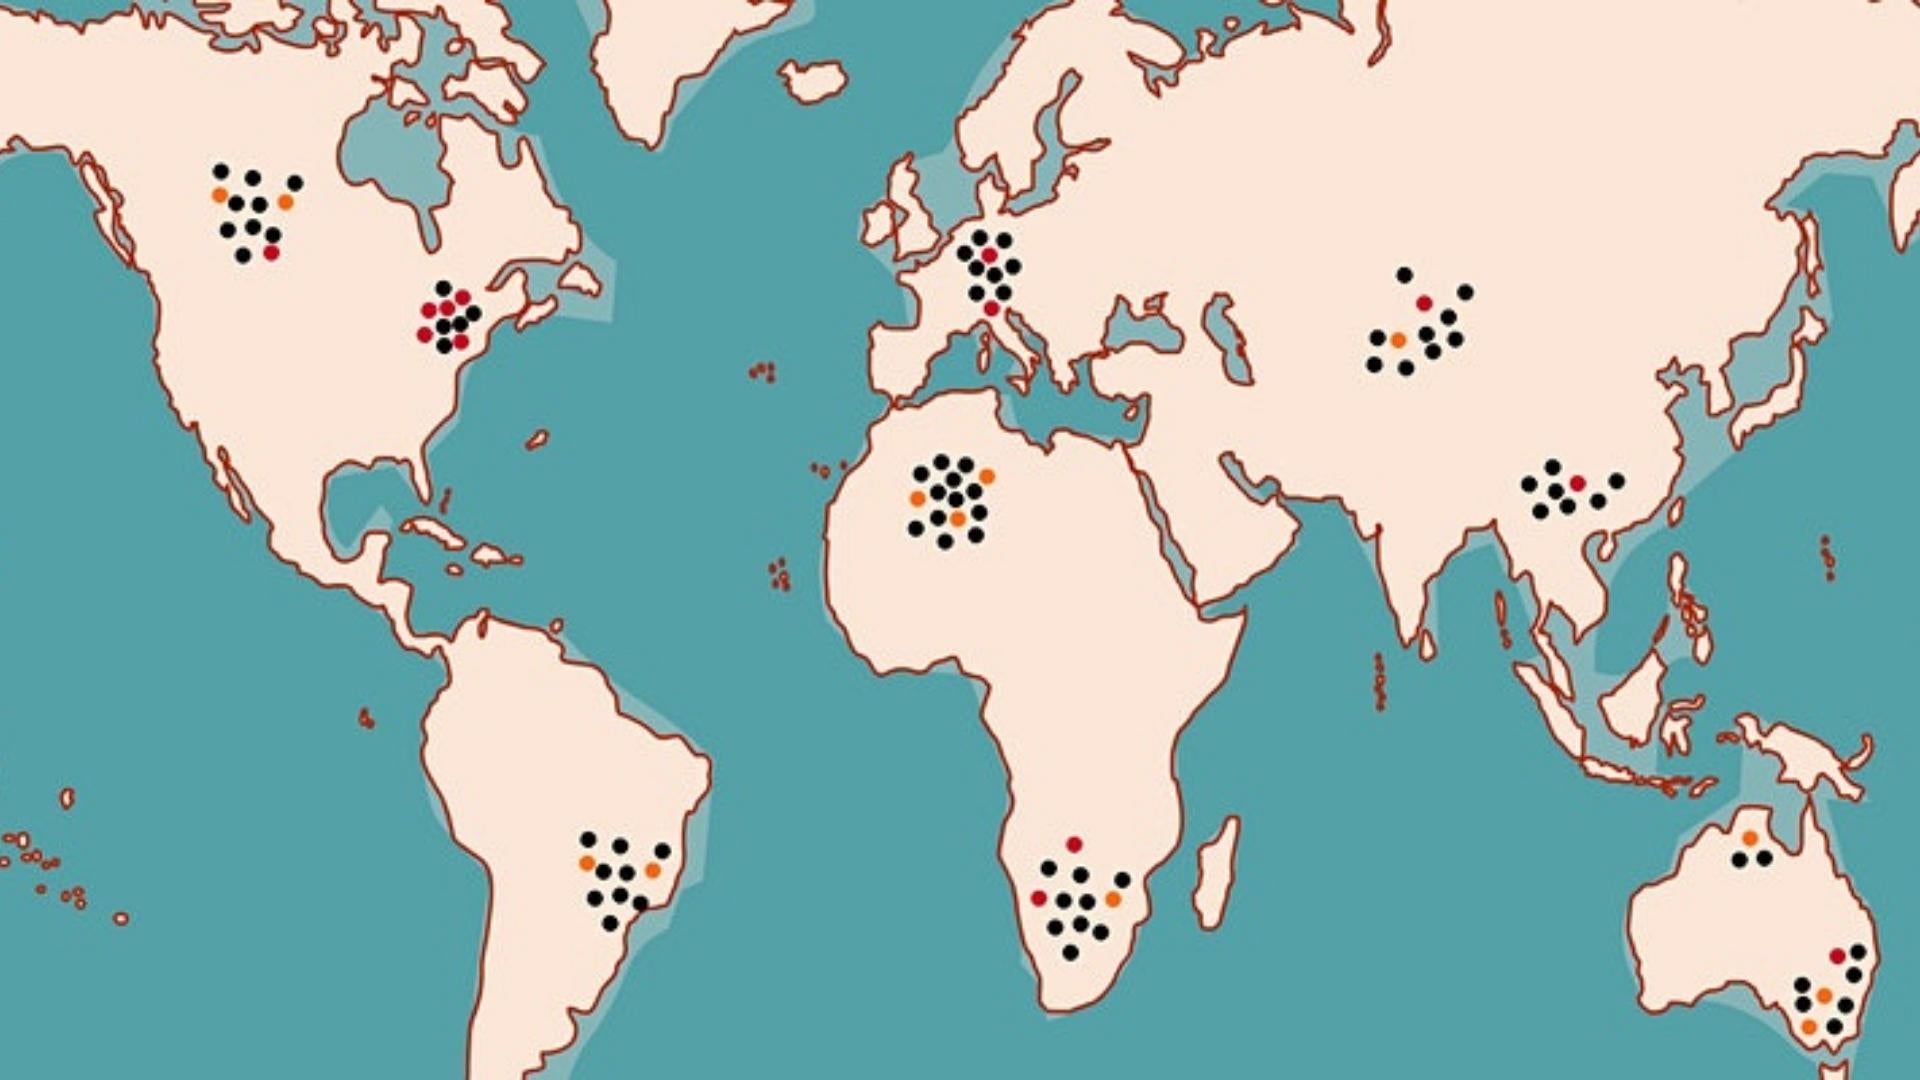 World map with dots marking populations